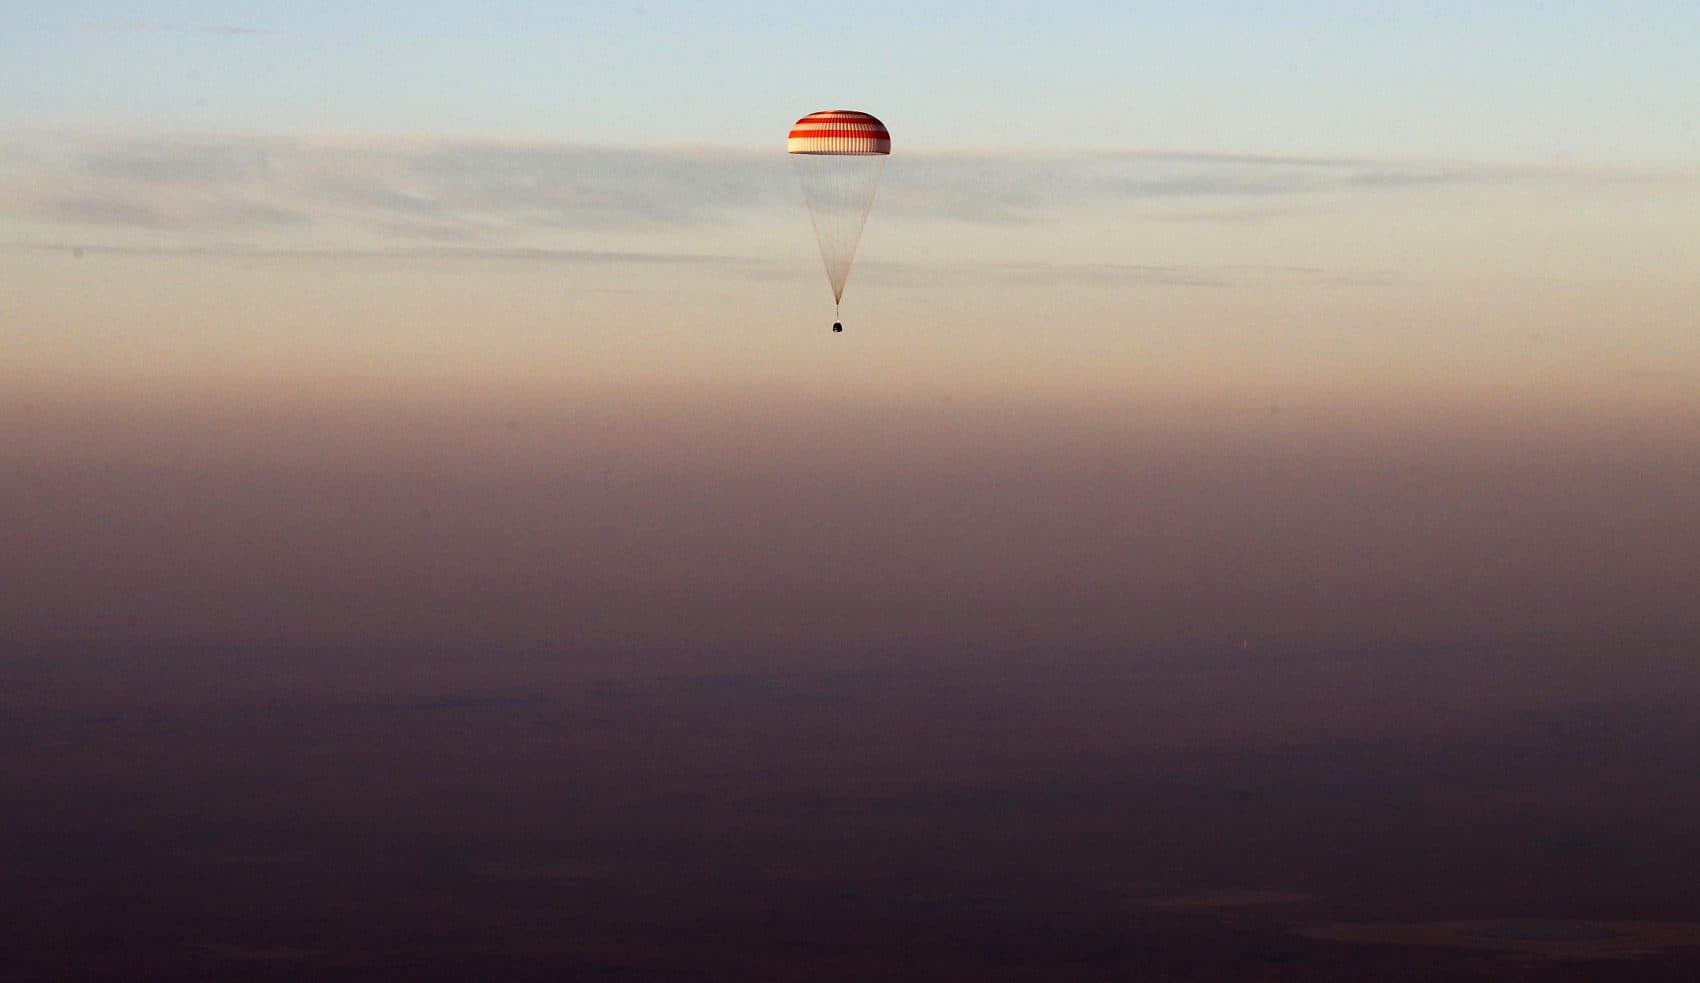 Perhaps aliens or robots would see enough potential in humanity to take us under their wing, writes Joelle Renstrom. And no travel ban or wall would stop them. Pictured: The Soyuz TMA-19M capsule carrying NASA's Jeff Williams, and two Russian cosmonauts descends beneath a parachute over Kazakhstan, in Sept., 2016 after a six-month mission aboard the International Space Station. (Maxim Shipenkov/AP)